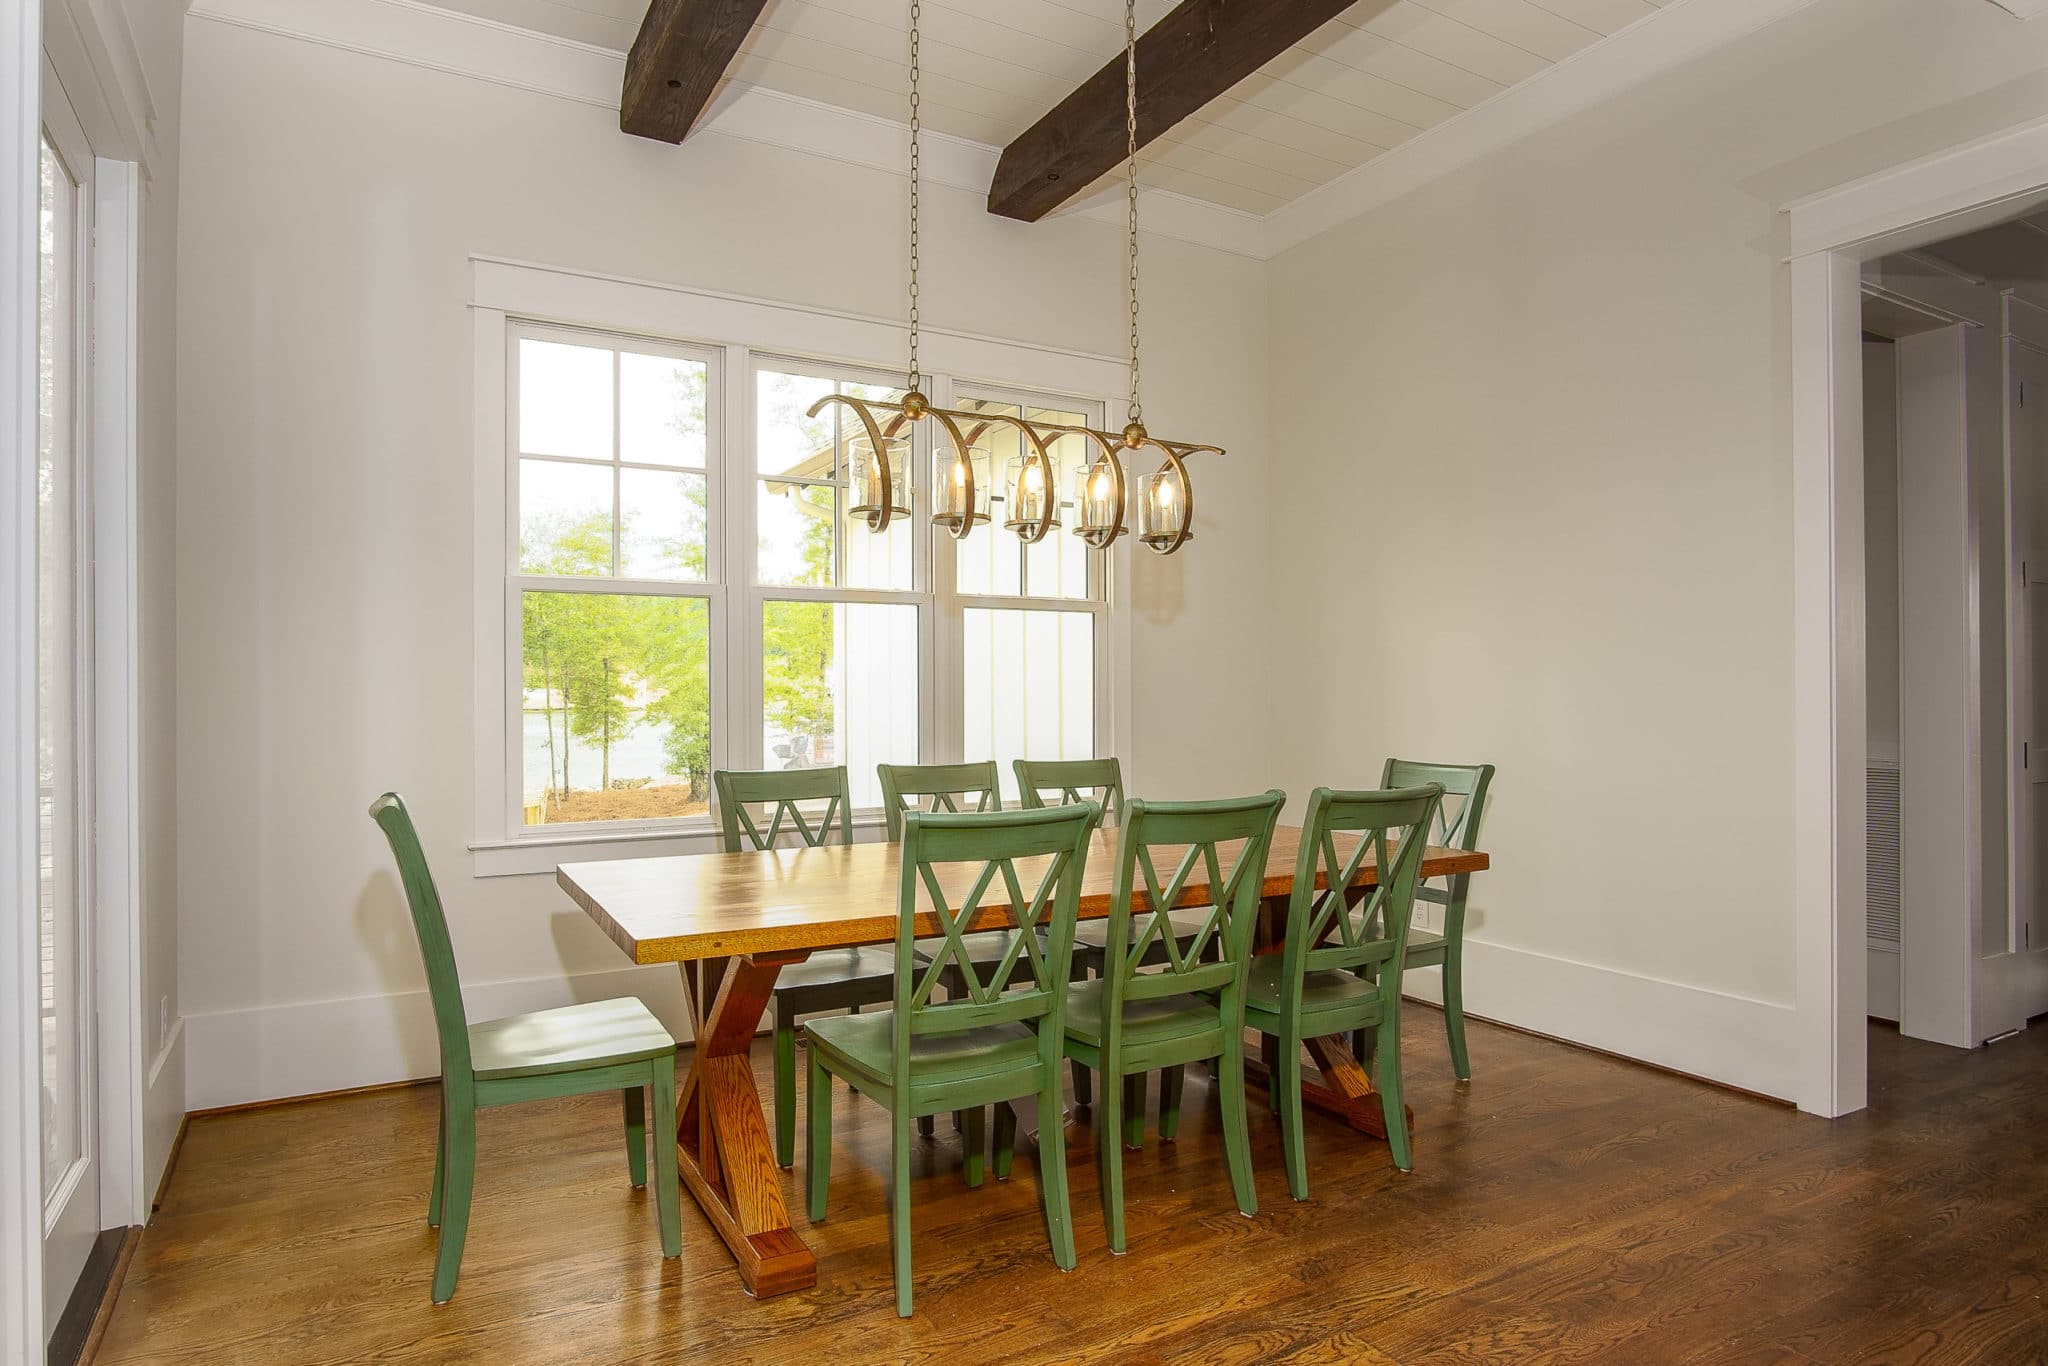 Picture of well-lit dining area featuring green chairs and a long, wood-finished table.